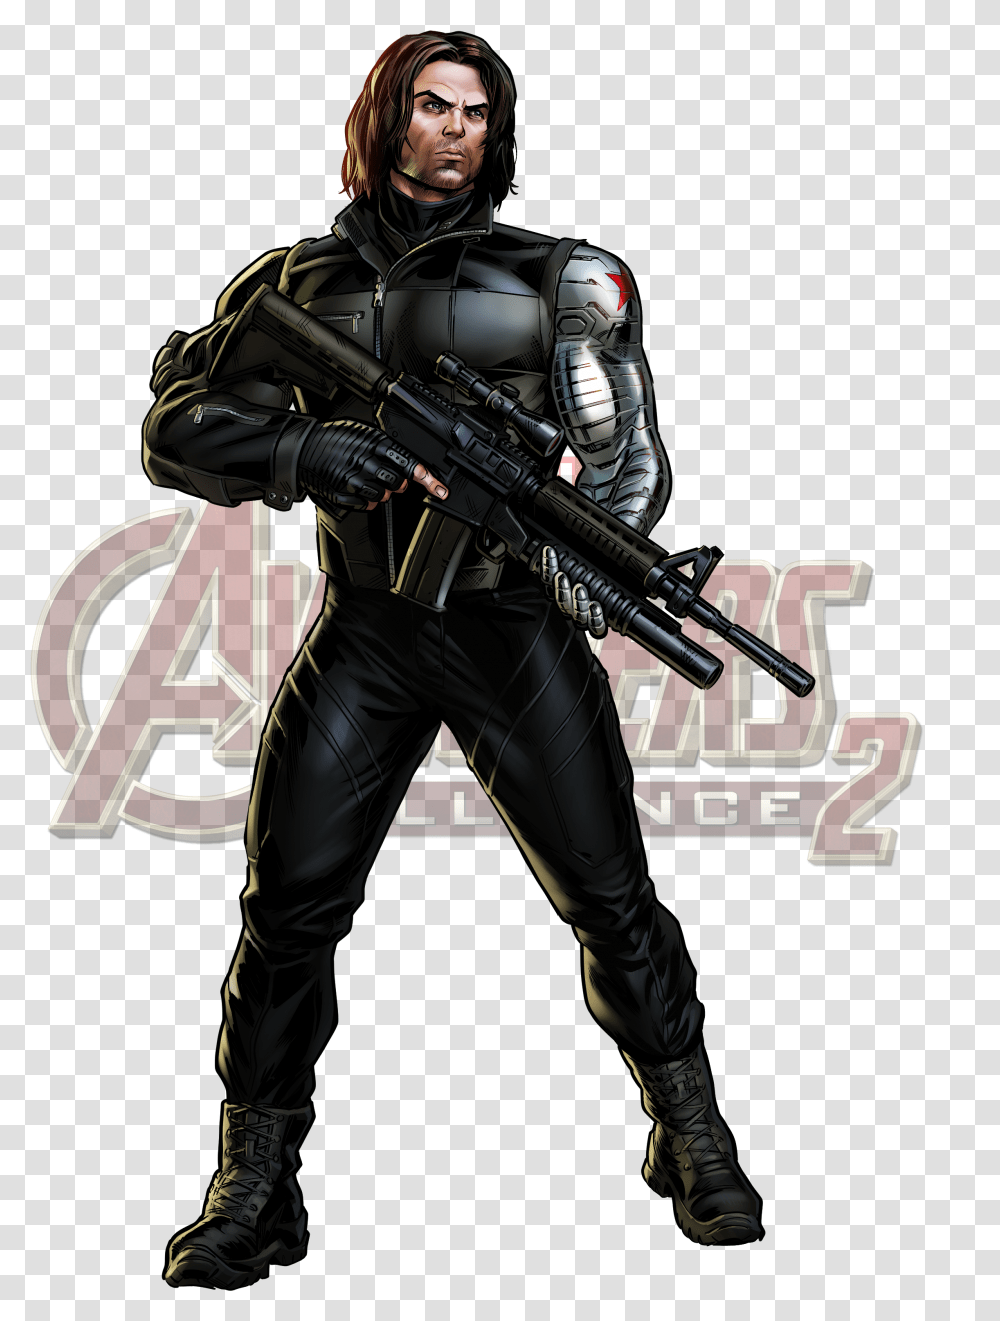 Avengers Alliance 2 Wikia Marvel Ultimate Alliance 3 Winter Soldier, Person, Human, Gun, Weapon Transparent Png